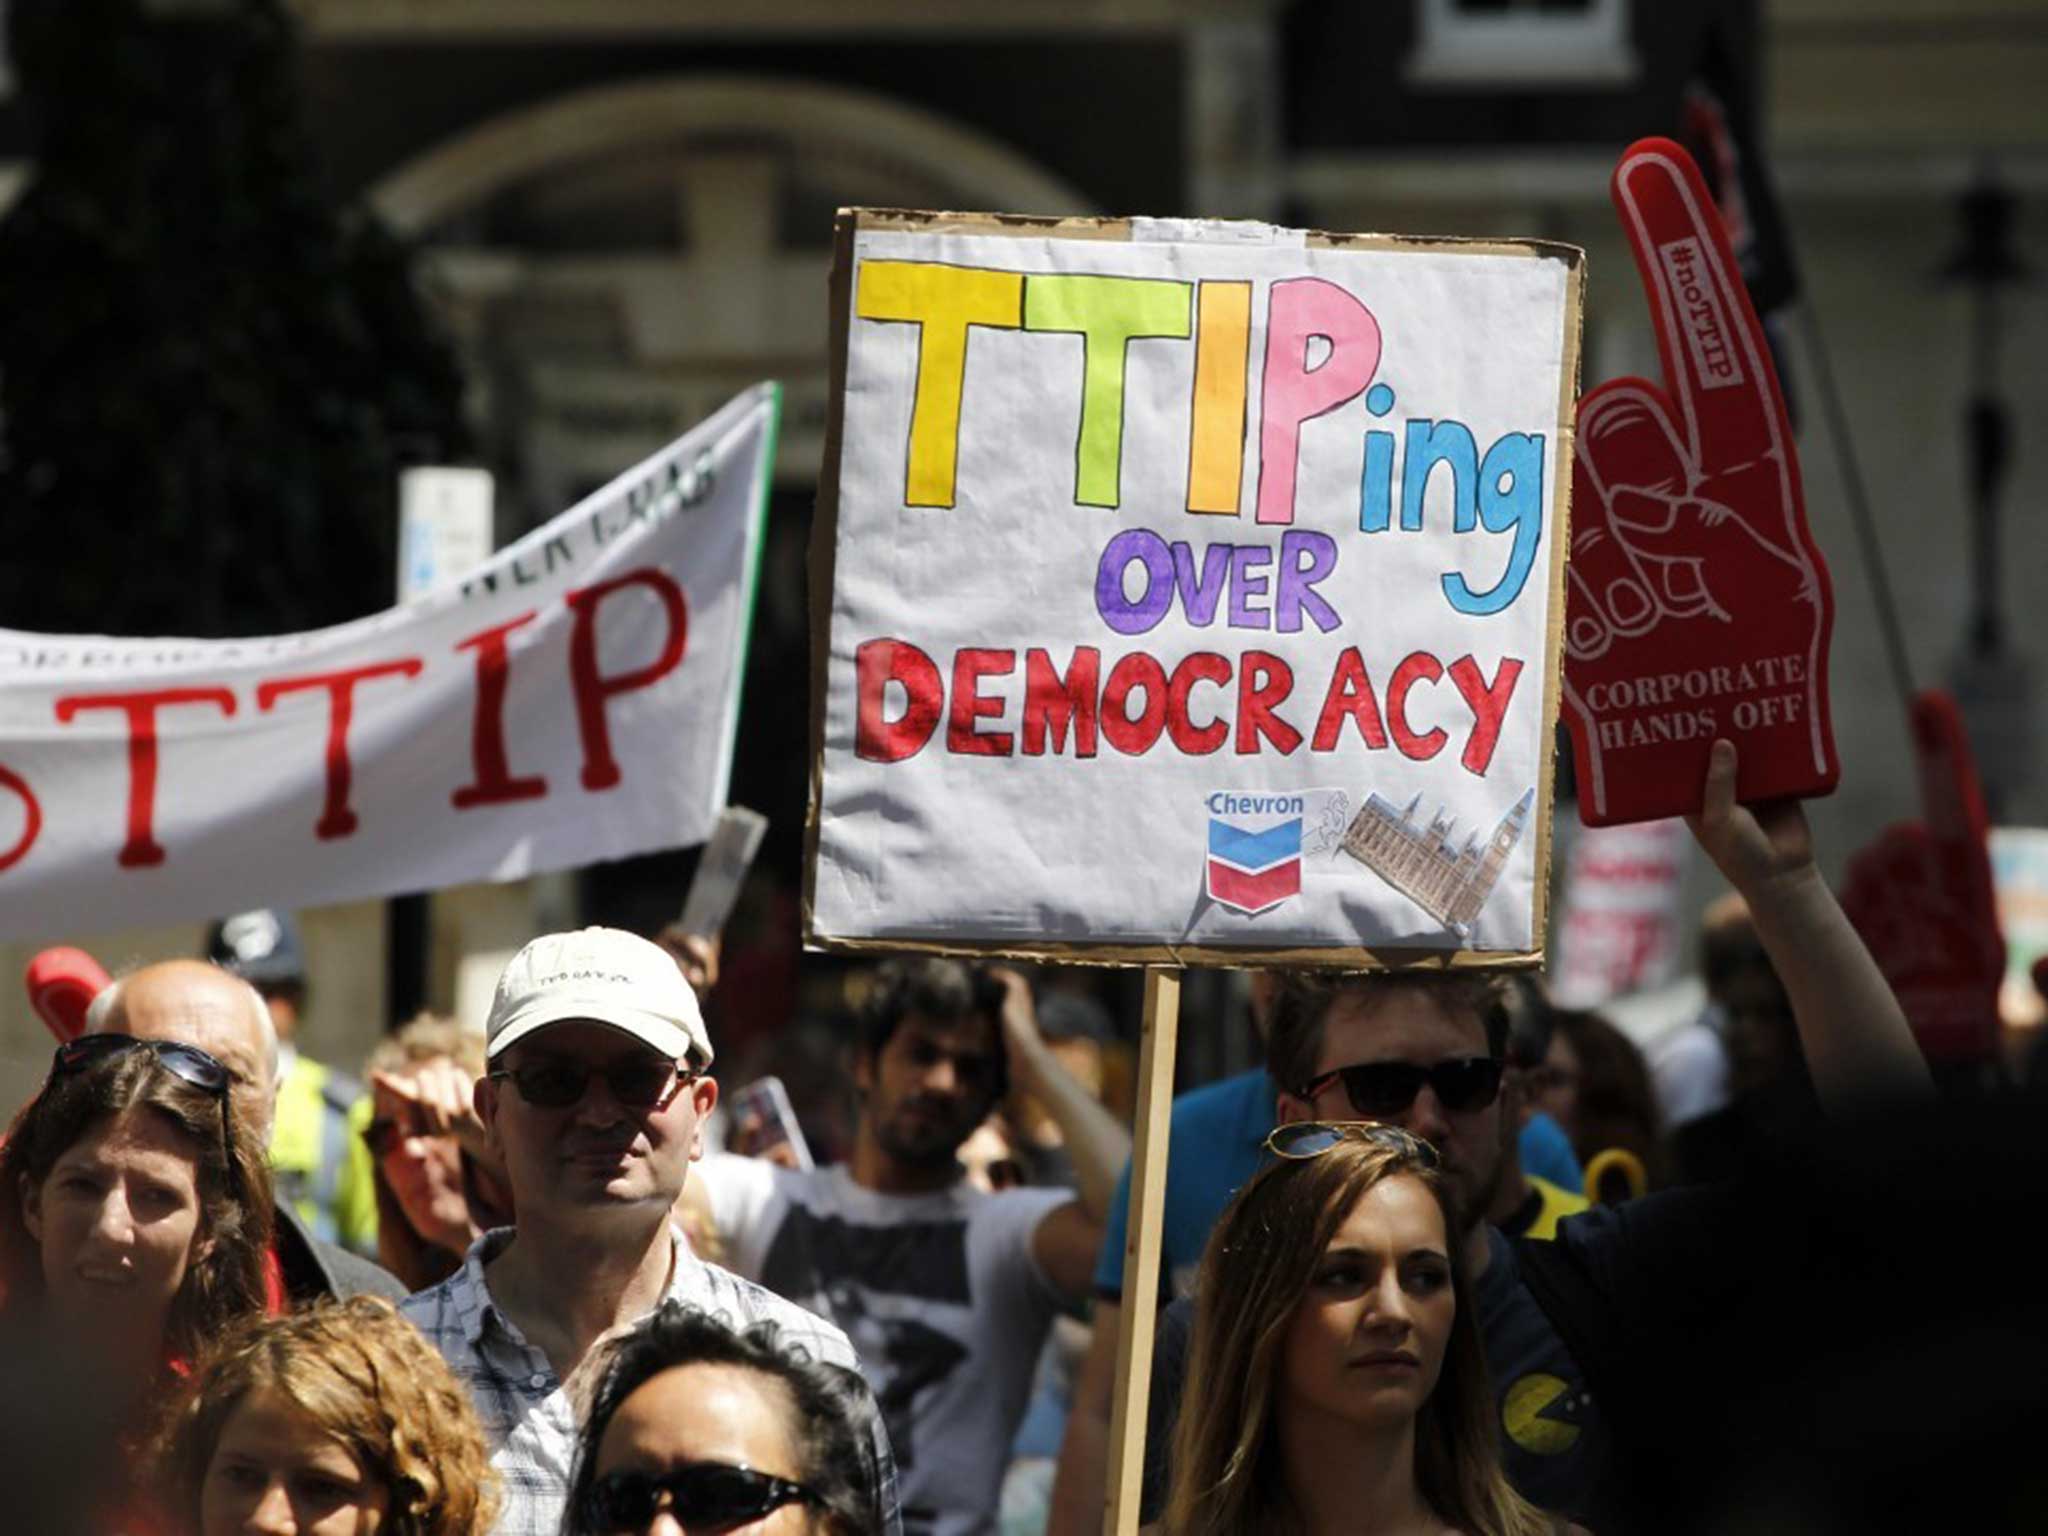 Protesters march against the controversial TTIP deal in London last year